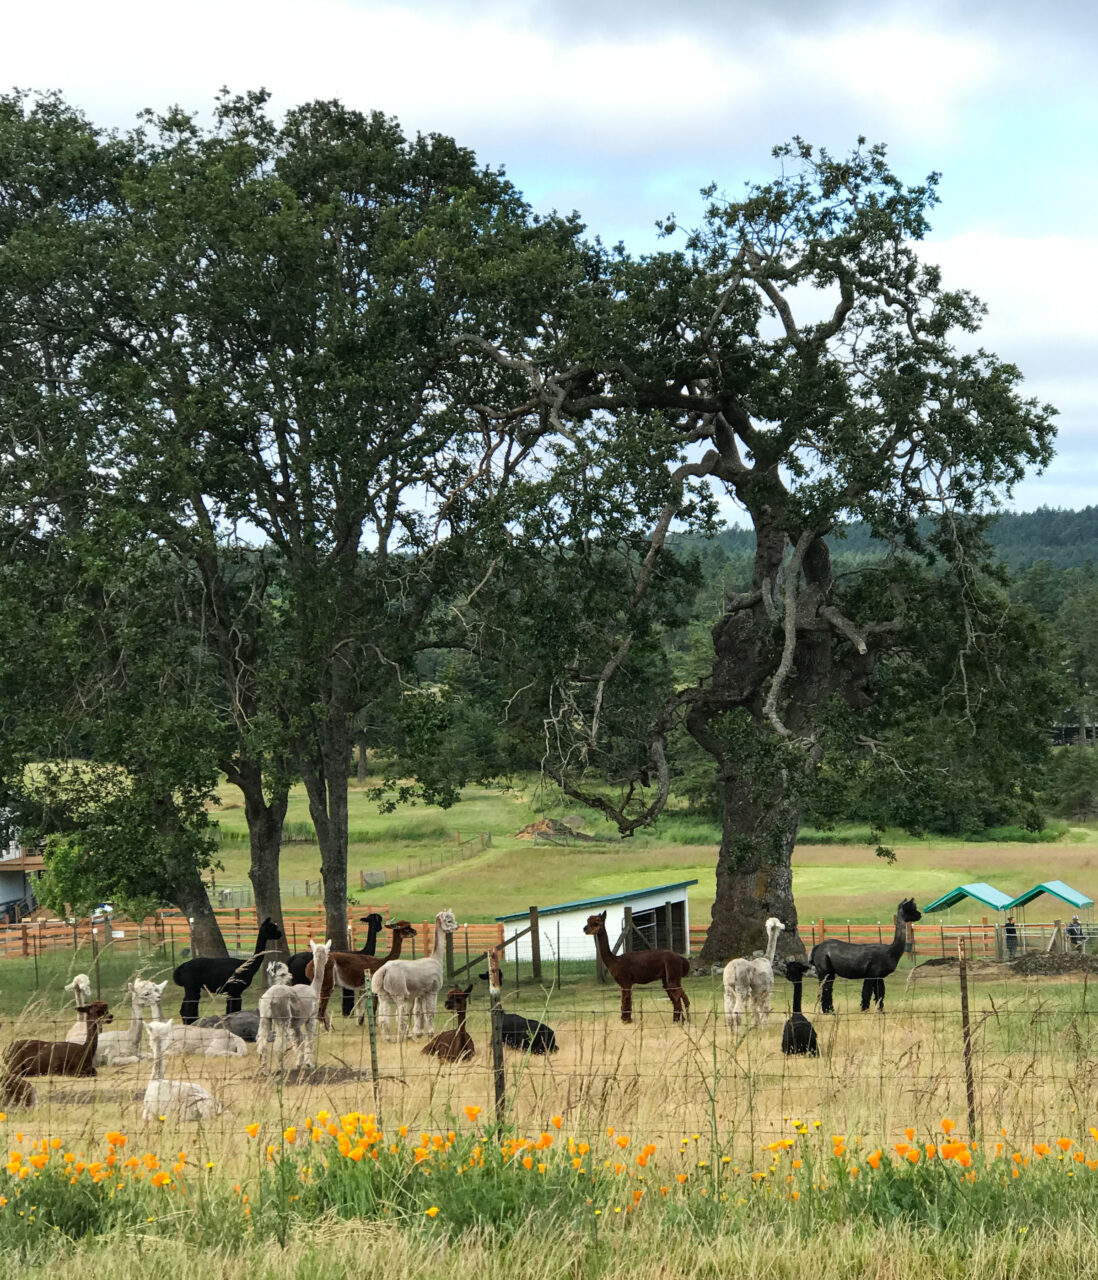 The Alpaca Farm is one of the many artisanal shopping opportunities on San Juan Island.